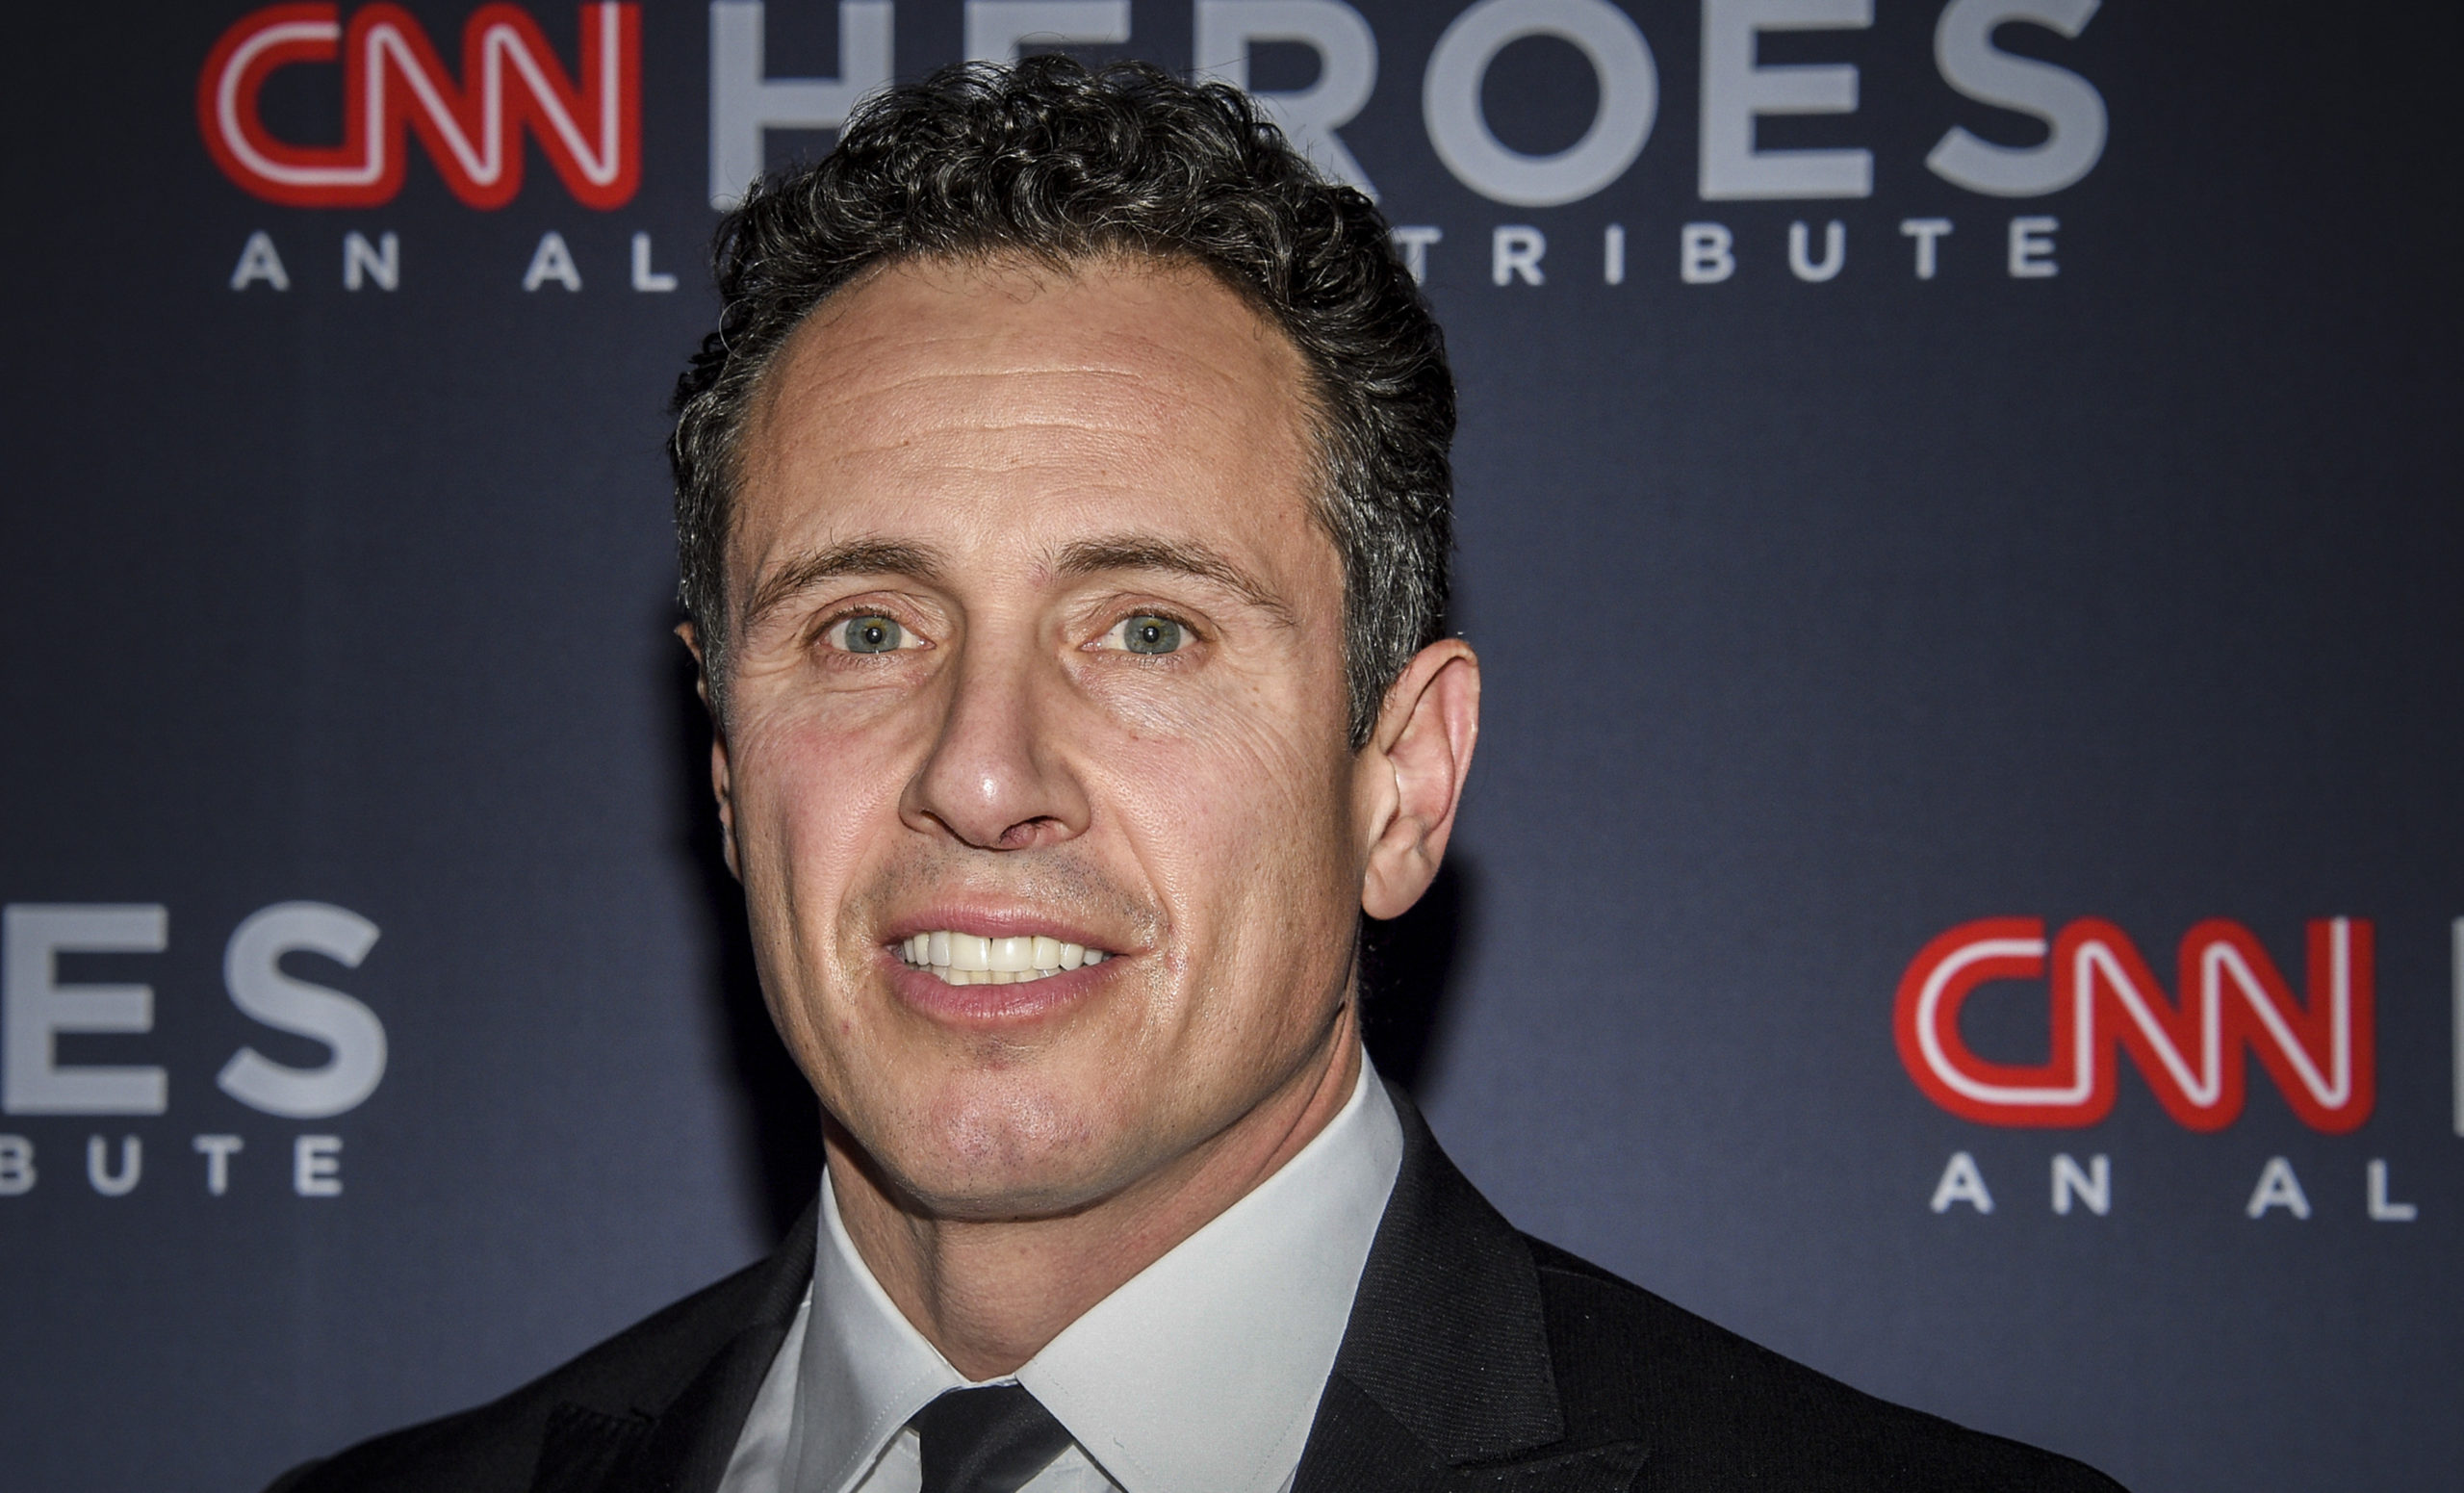 FILE - CNN anchor Chris Cuomo attends the 12th annual CNN Heroes tribute in New York, Dec. 8, 2018....